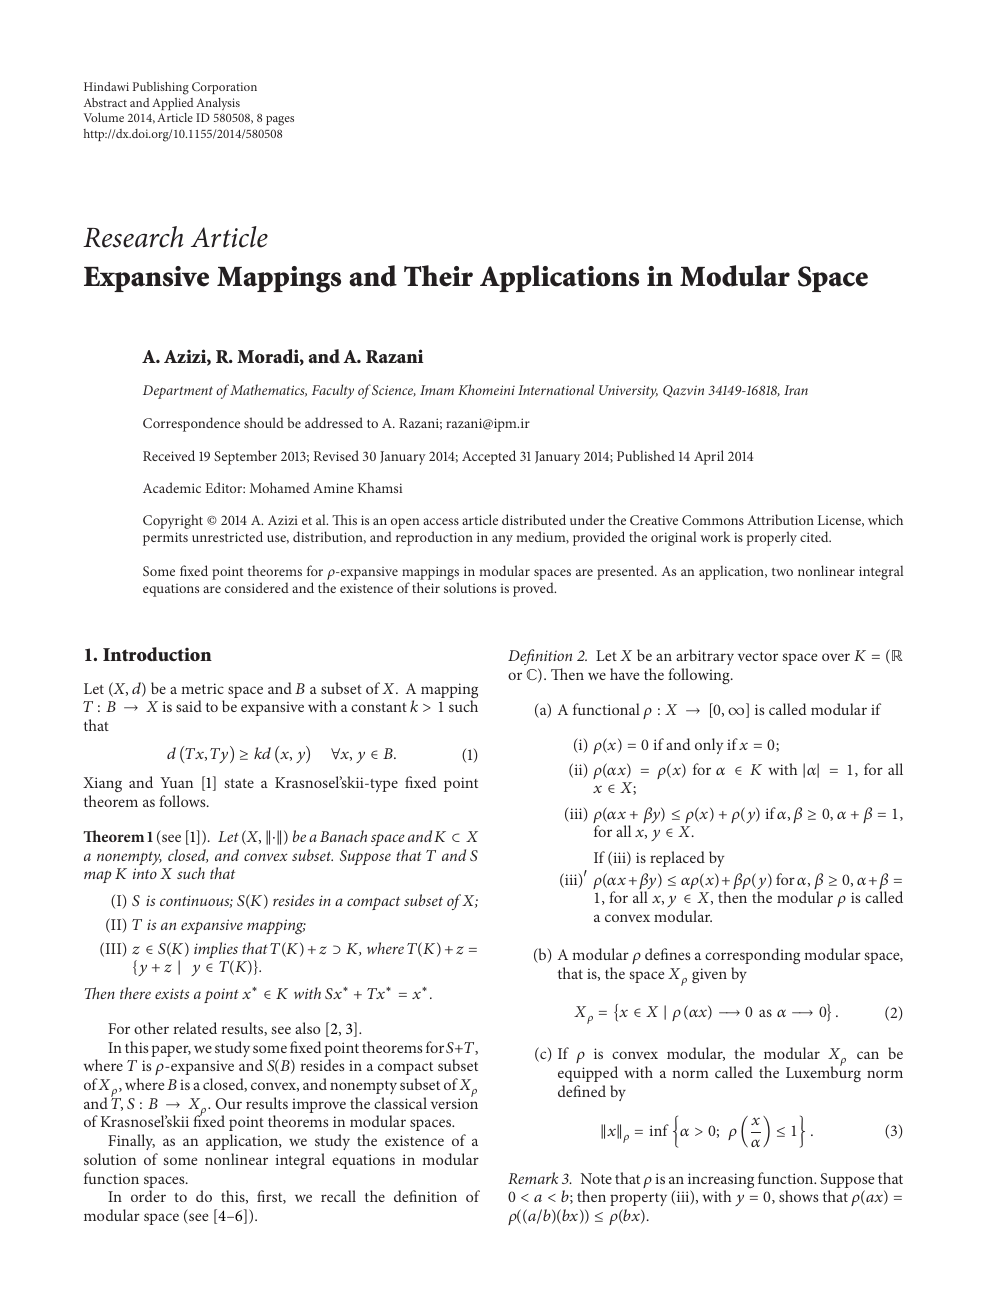 Expansive Mappings And Their Applications In Modular Space Topic Of Research Paper In Mathematics Download Scholarly Article Pdf And Read For Free On Cyberleninka Open Science Hub